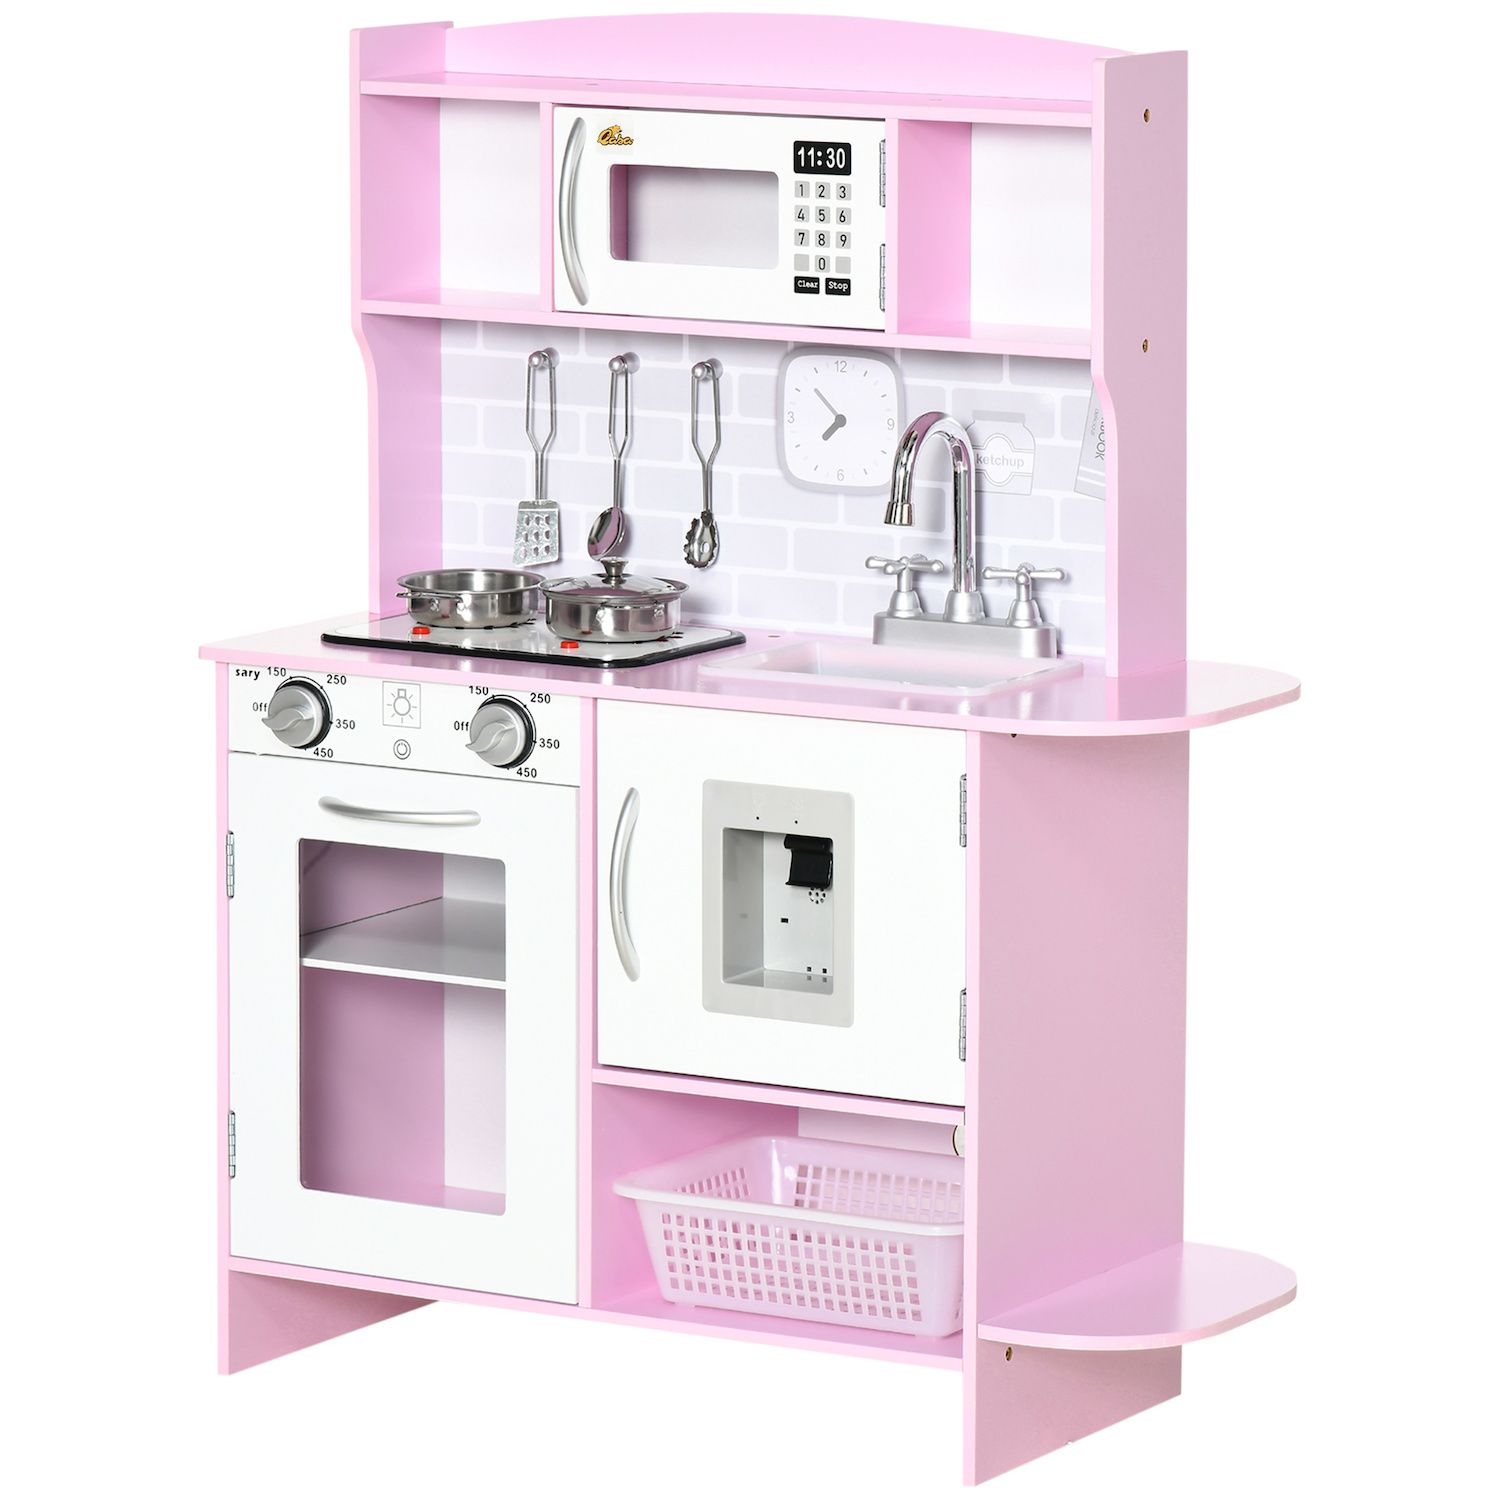 Lil' Jumbl Kids Wooden Kitchen Set, Pretend Working Sink with Real Running  Water, Includes Range Hood, Microwave & Stove Top That Make Realistic Sound